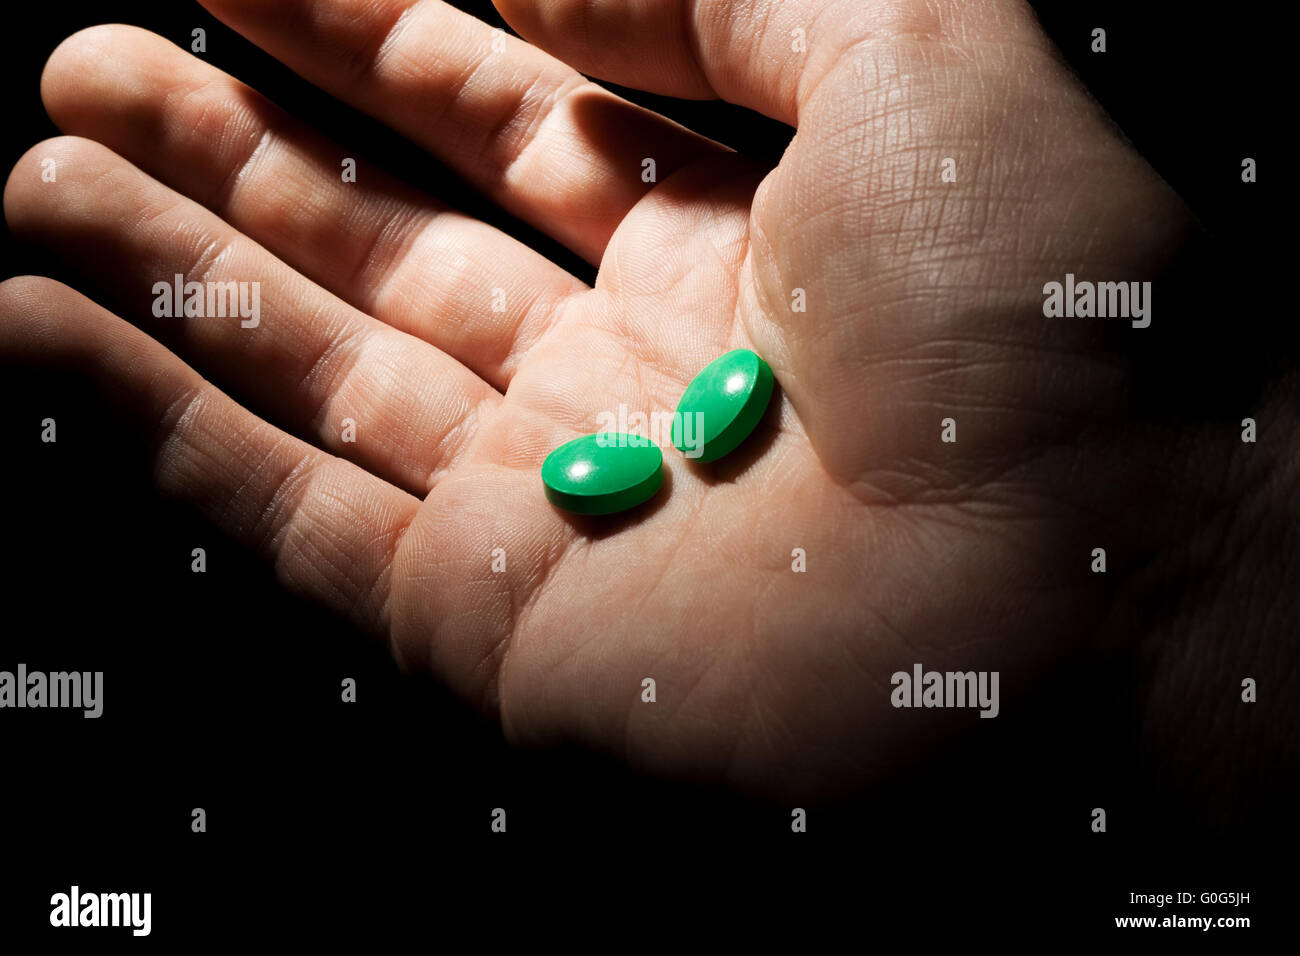 Two green pills on the opened palm Stock Photo